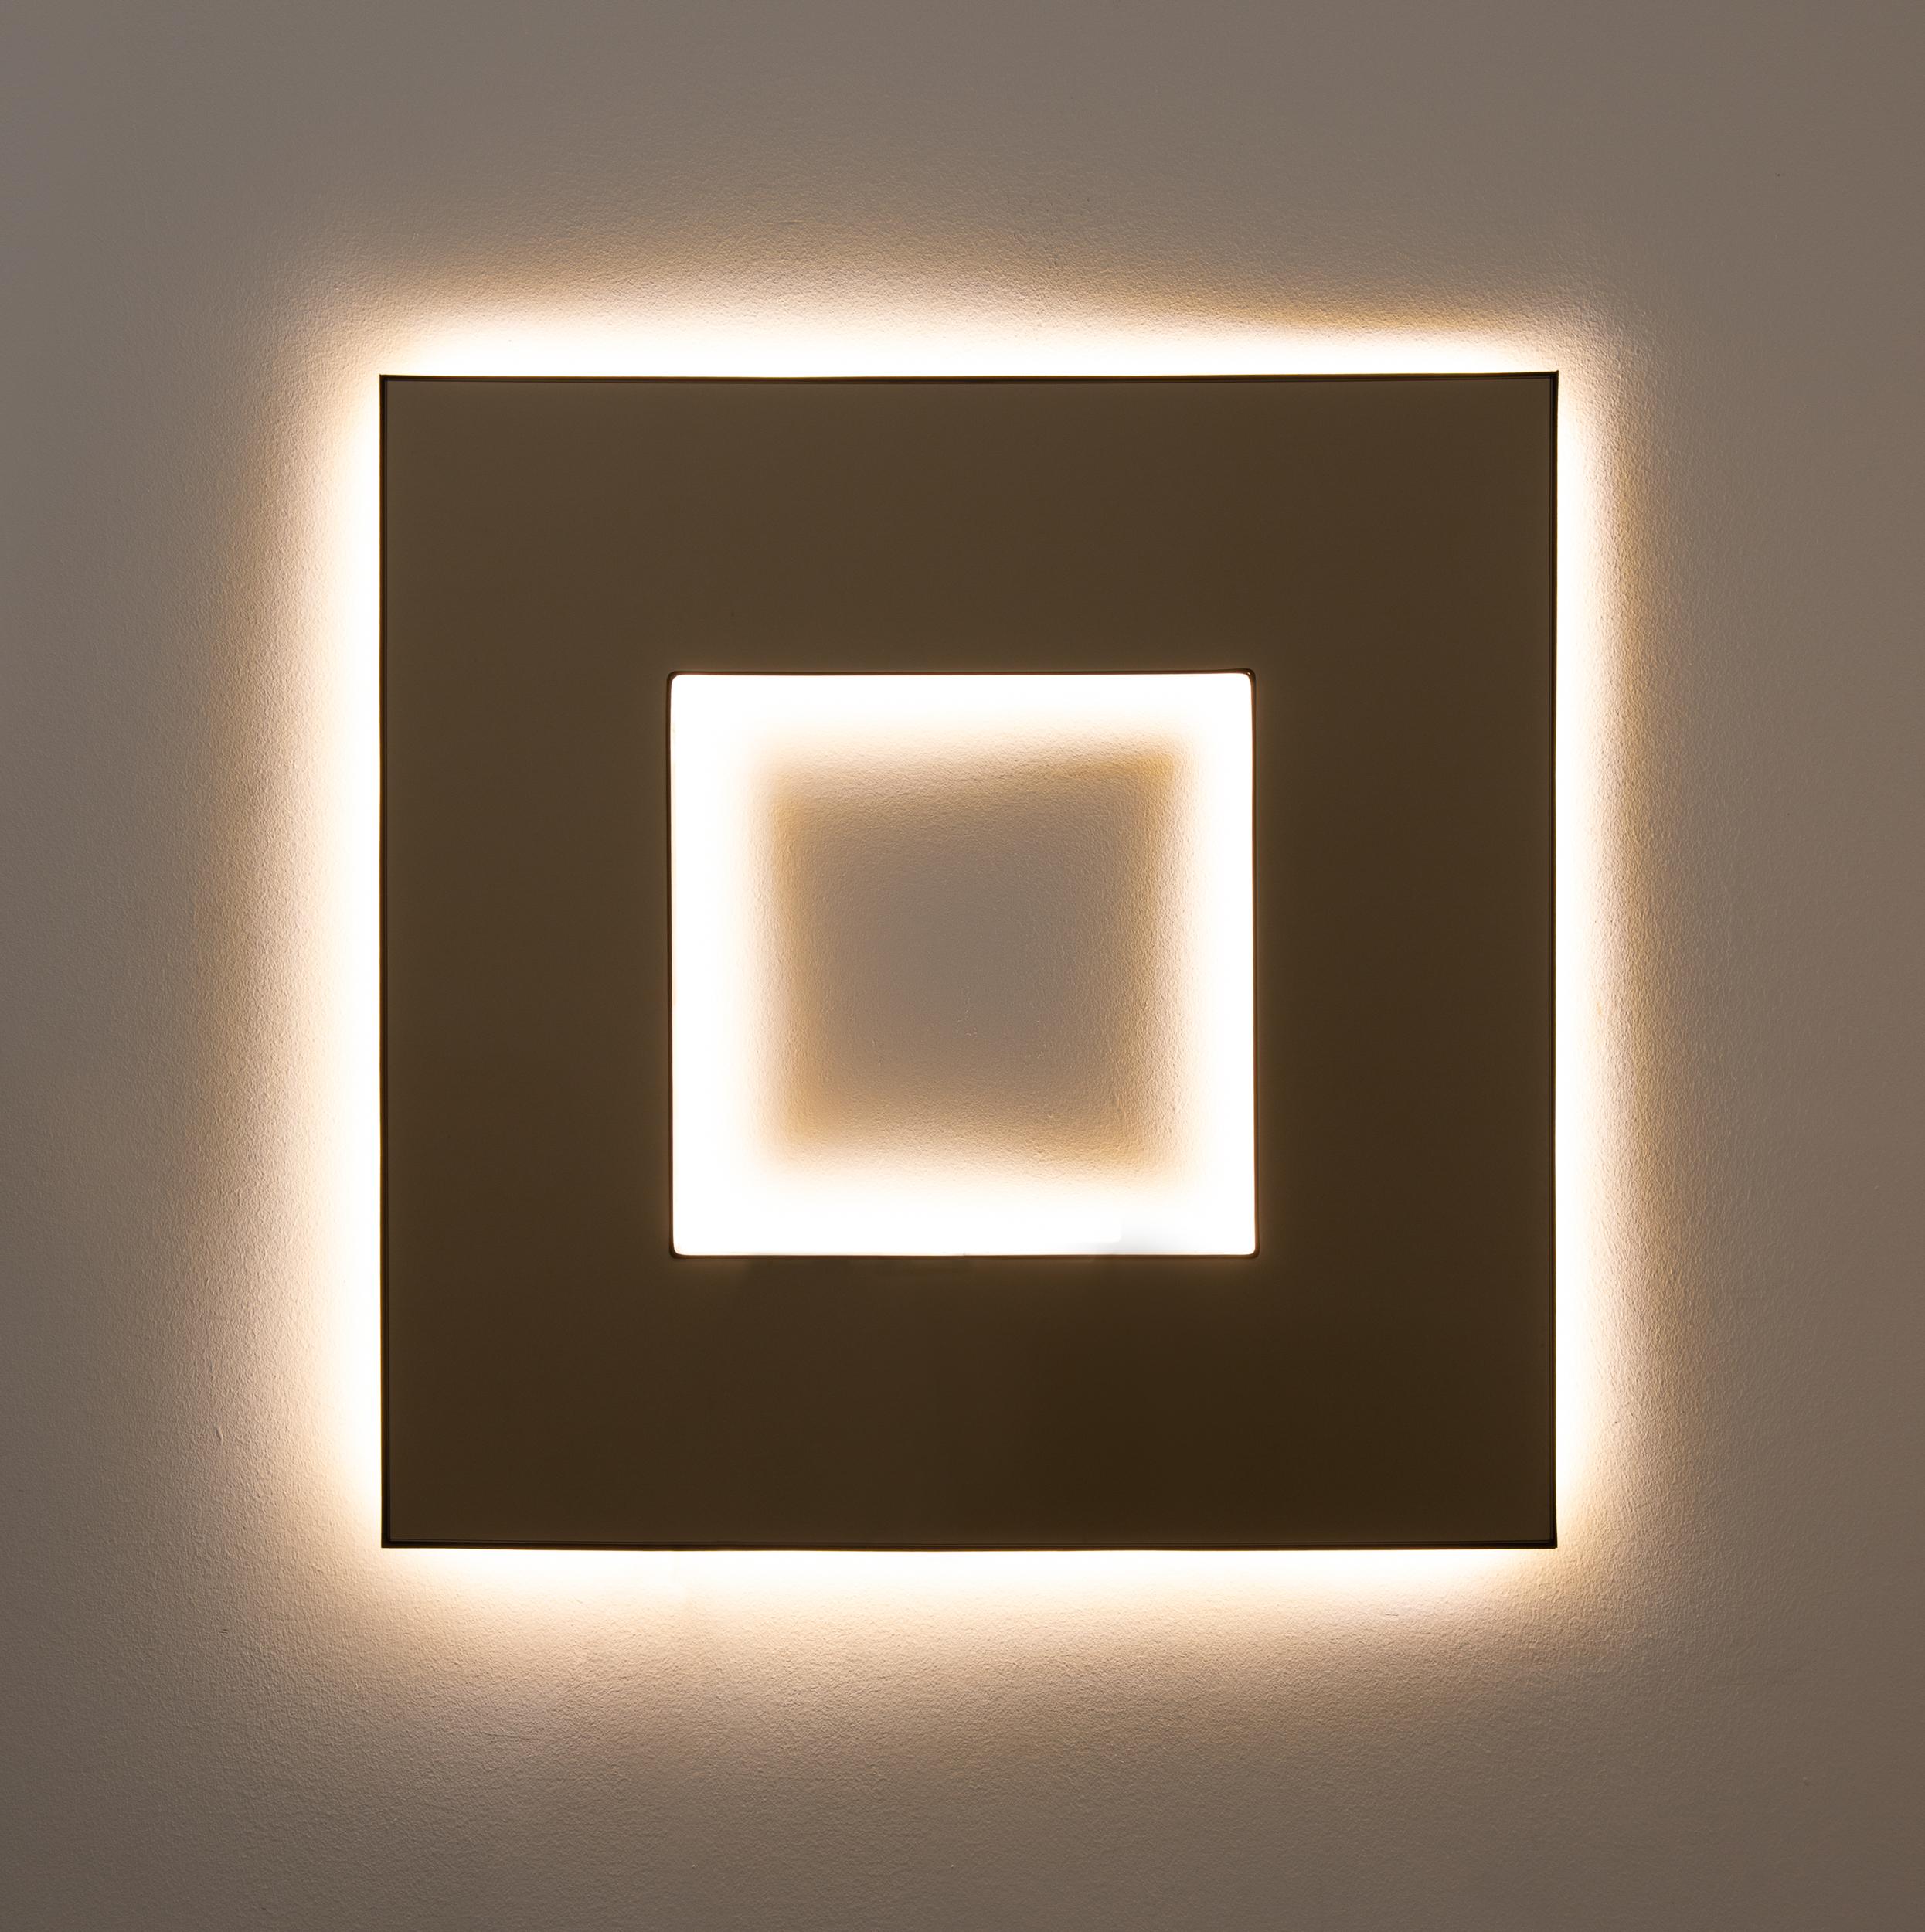 Contemporary Donut™ bronze tinted square mirror with a bronze patina brass frame and back illumination.

The latest creation by mirror designer Jose Luis Alguacil Rodriguez is a very exciting contemporary piece that offers a unique focal point for